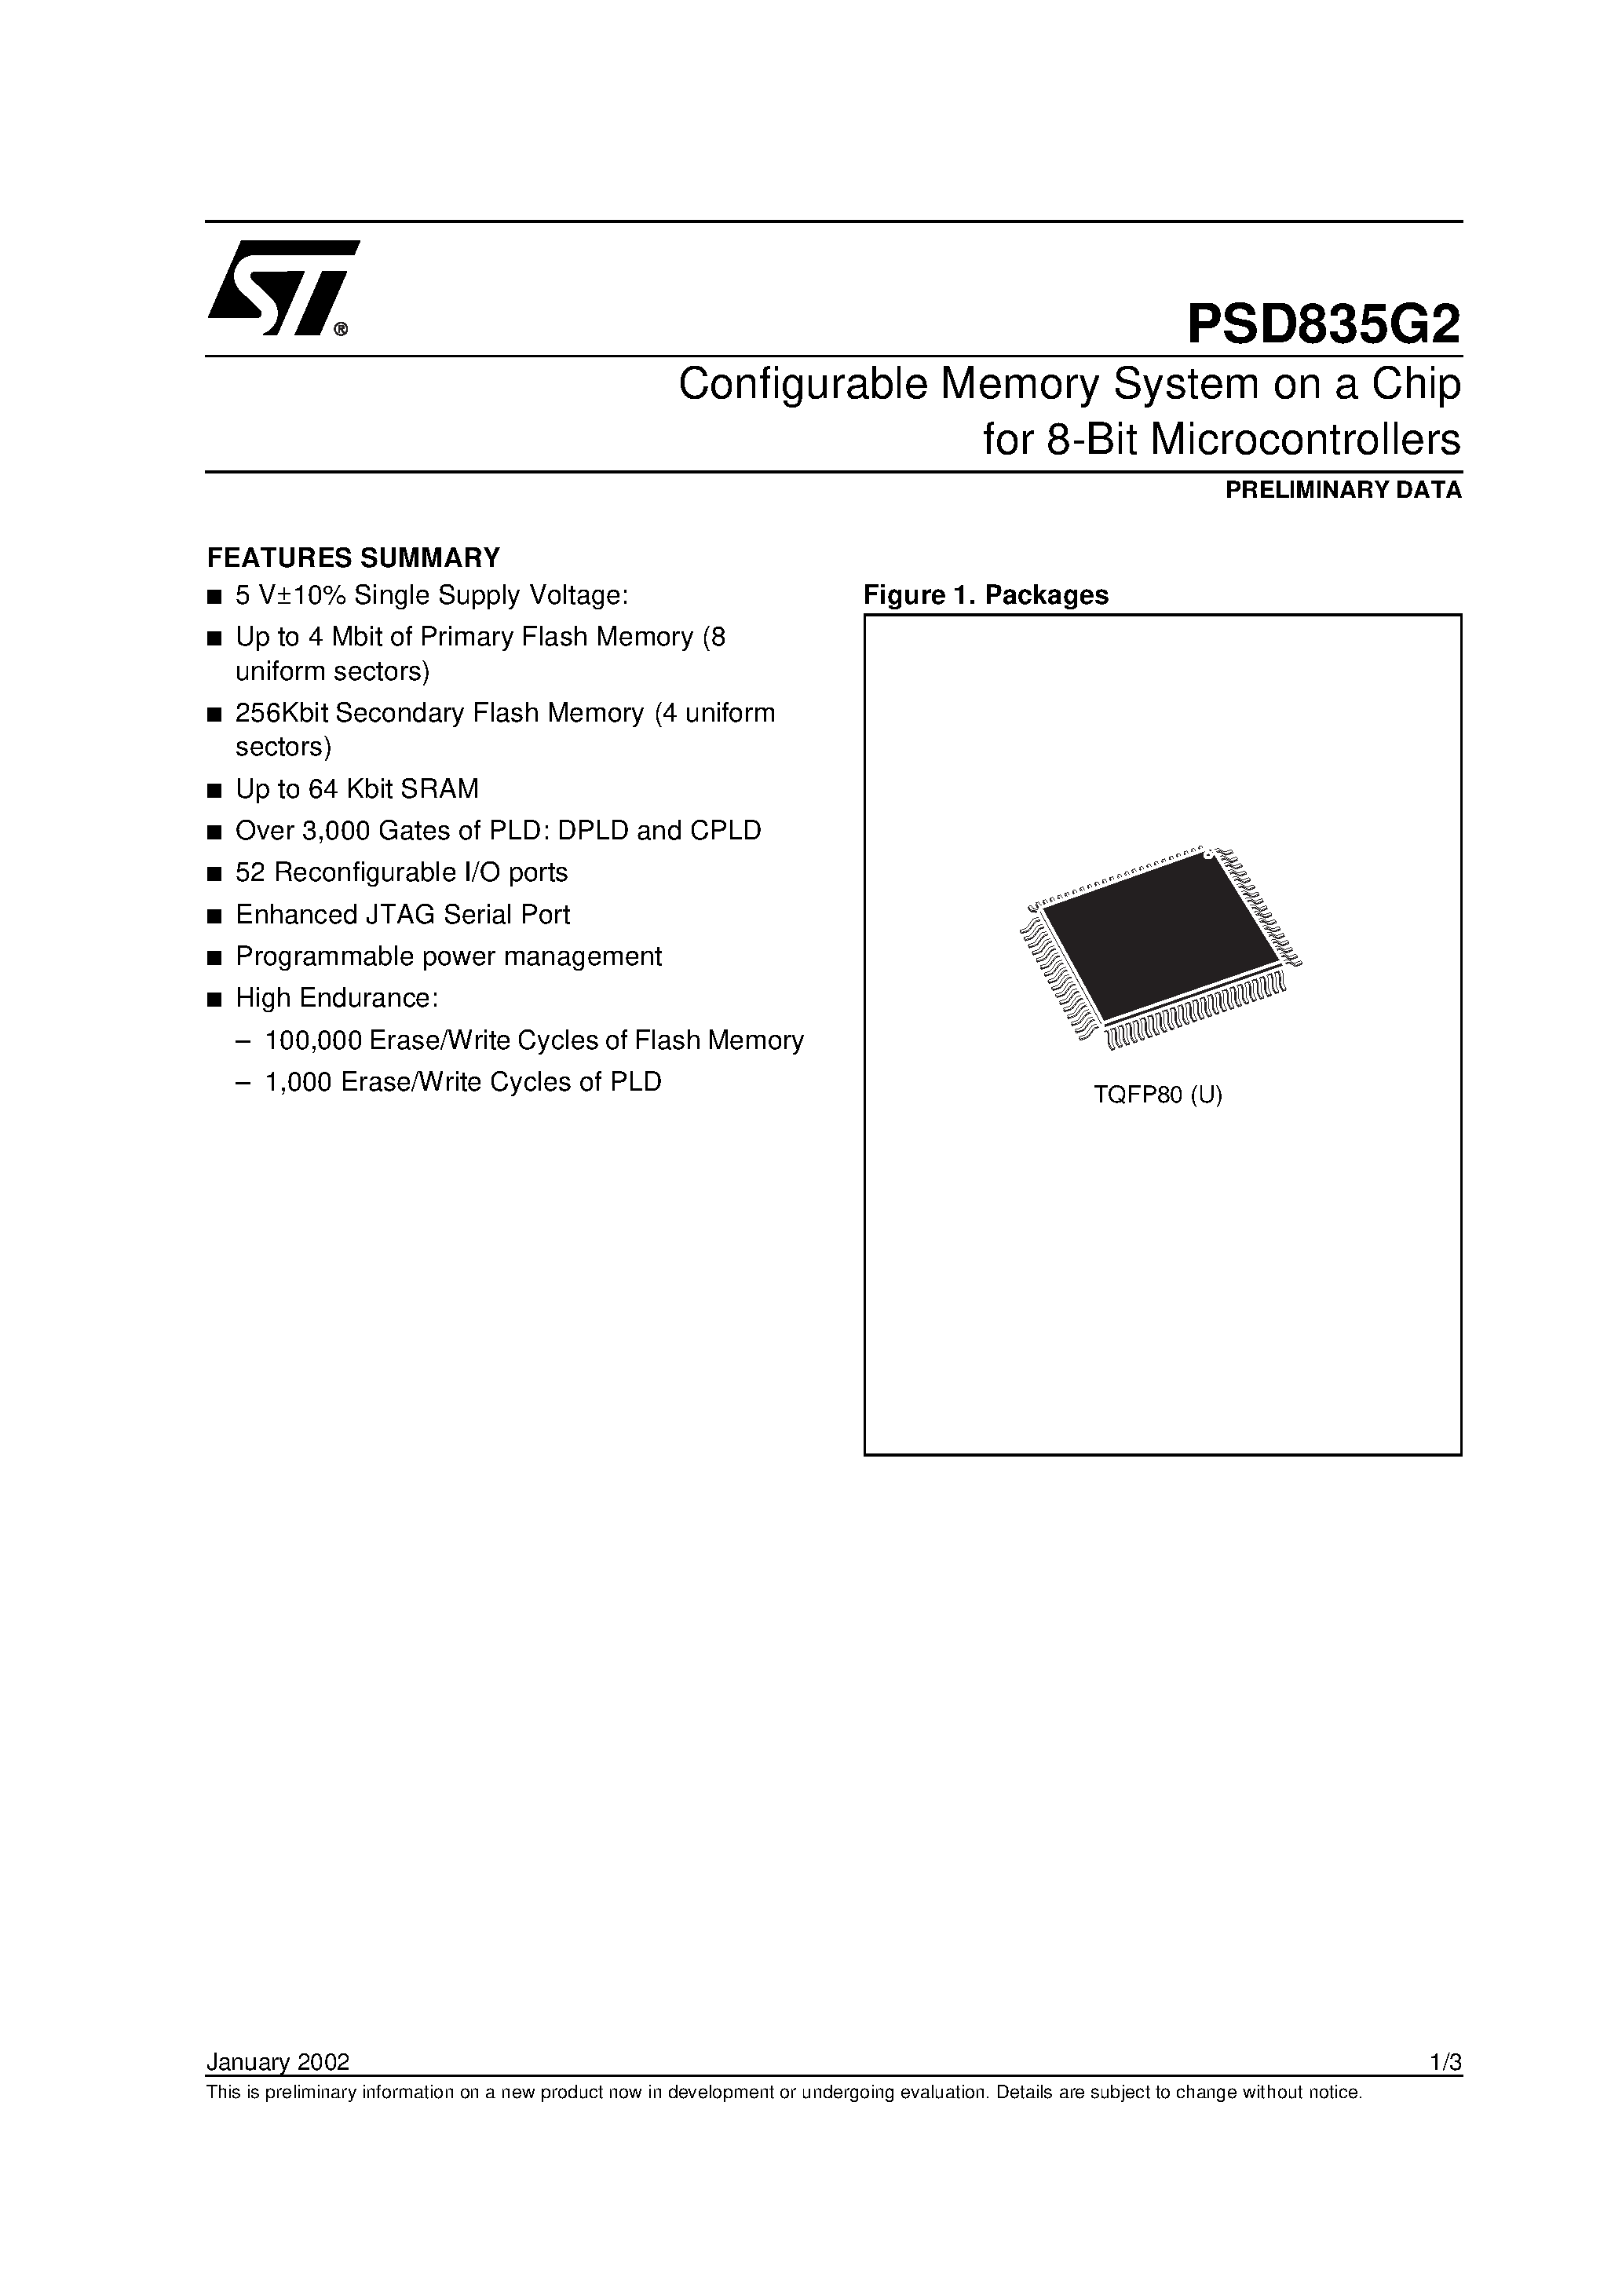 Datasheet PSD835F2-A-70U - Configurable Memory System on a Chip for 8-Bit Microcontrollers page 1